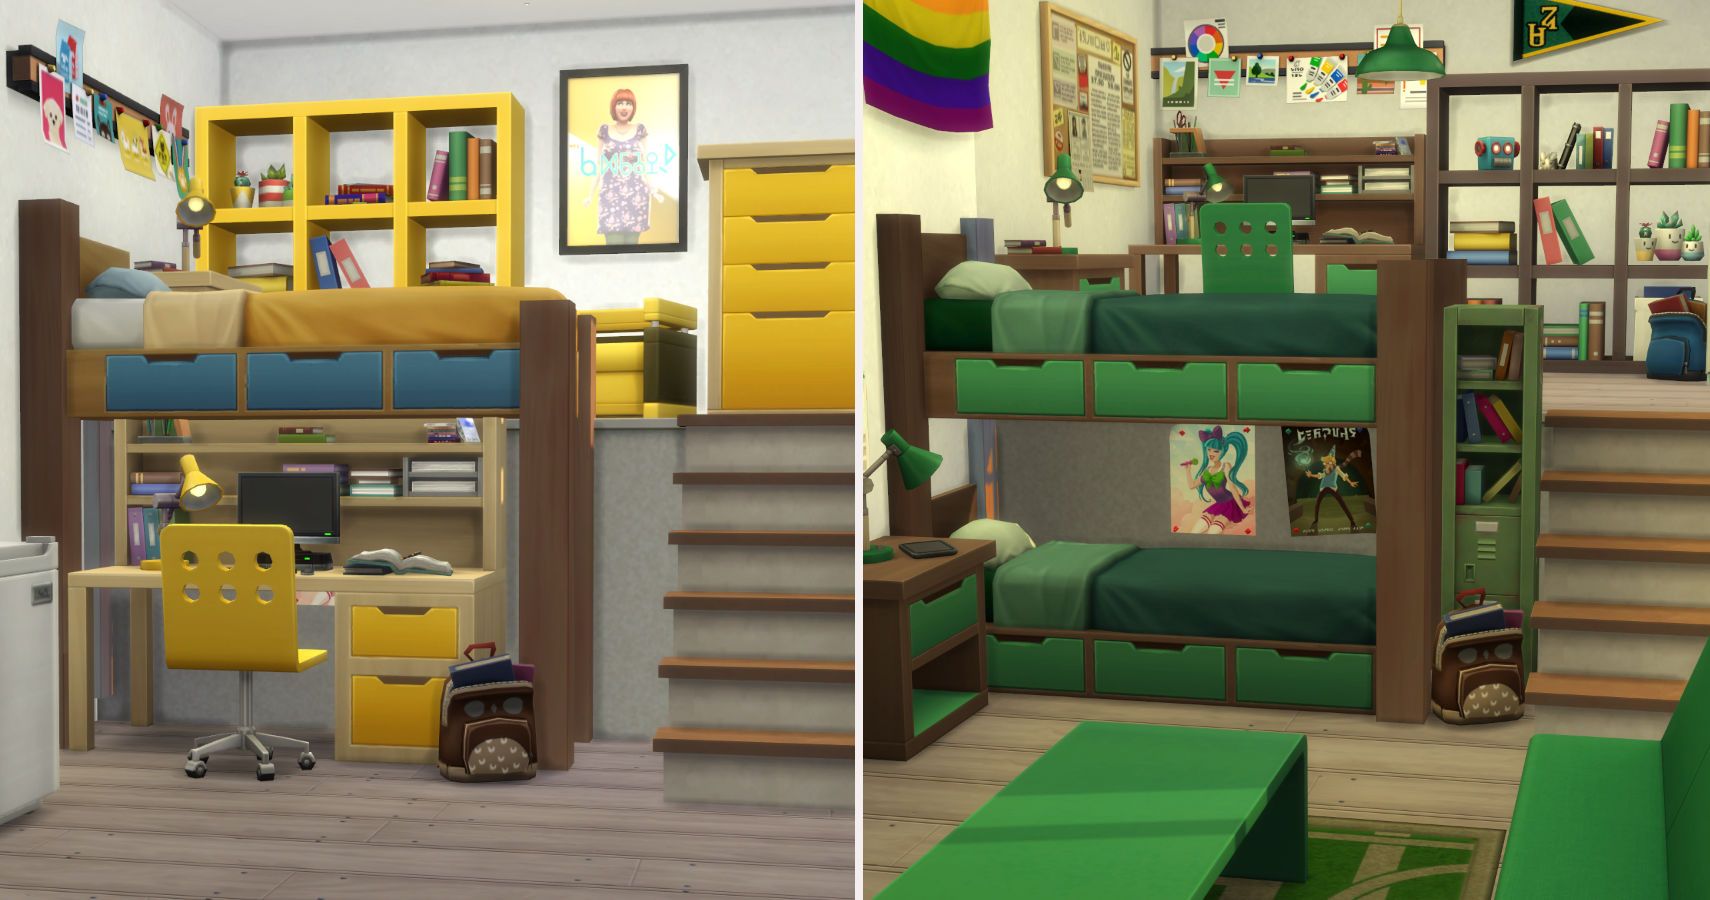 The Sims 4 A Step By Guide To, Sims 4 Bunk Beds